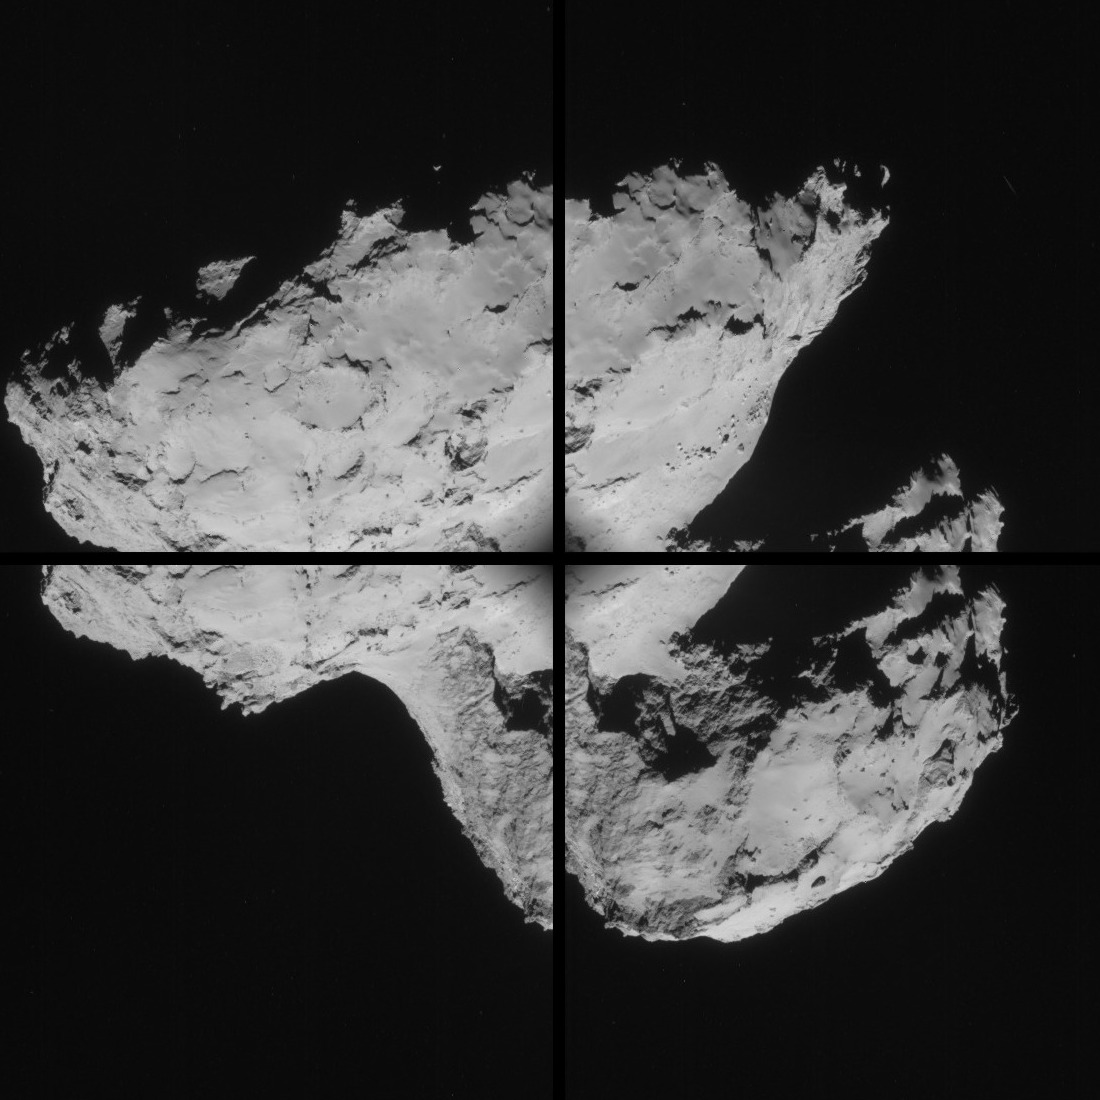 Four image montage of comet 67P/C-G, using images taken on 31 August. Credits: ESA/Rosetta/NAVCAM